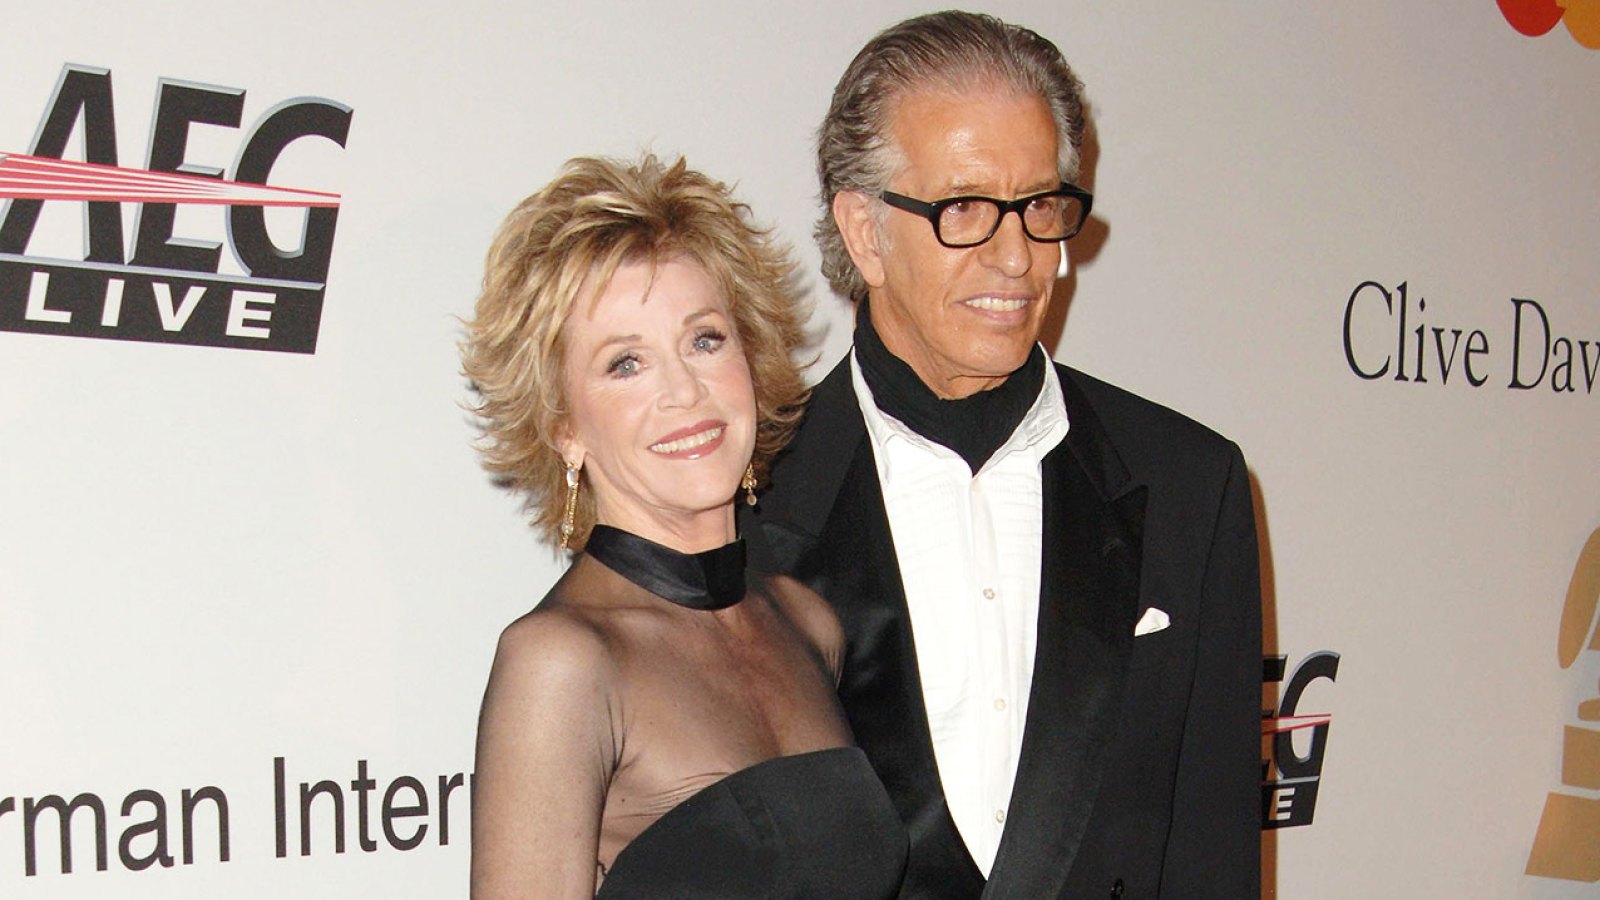 Jane Fonda: “At 74, I Have Never Had Such a Fulfilling Sex Life”